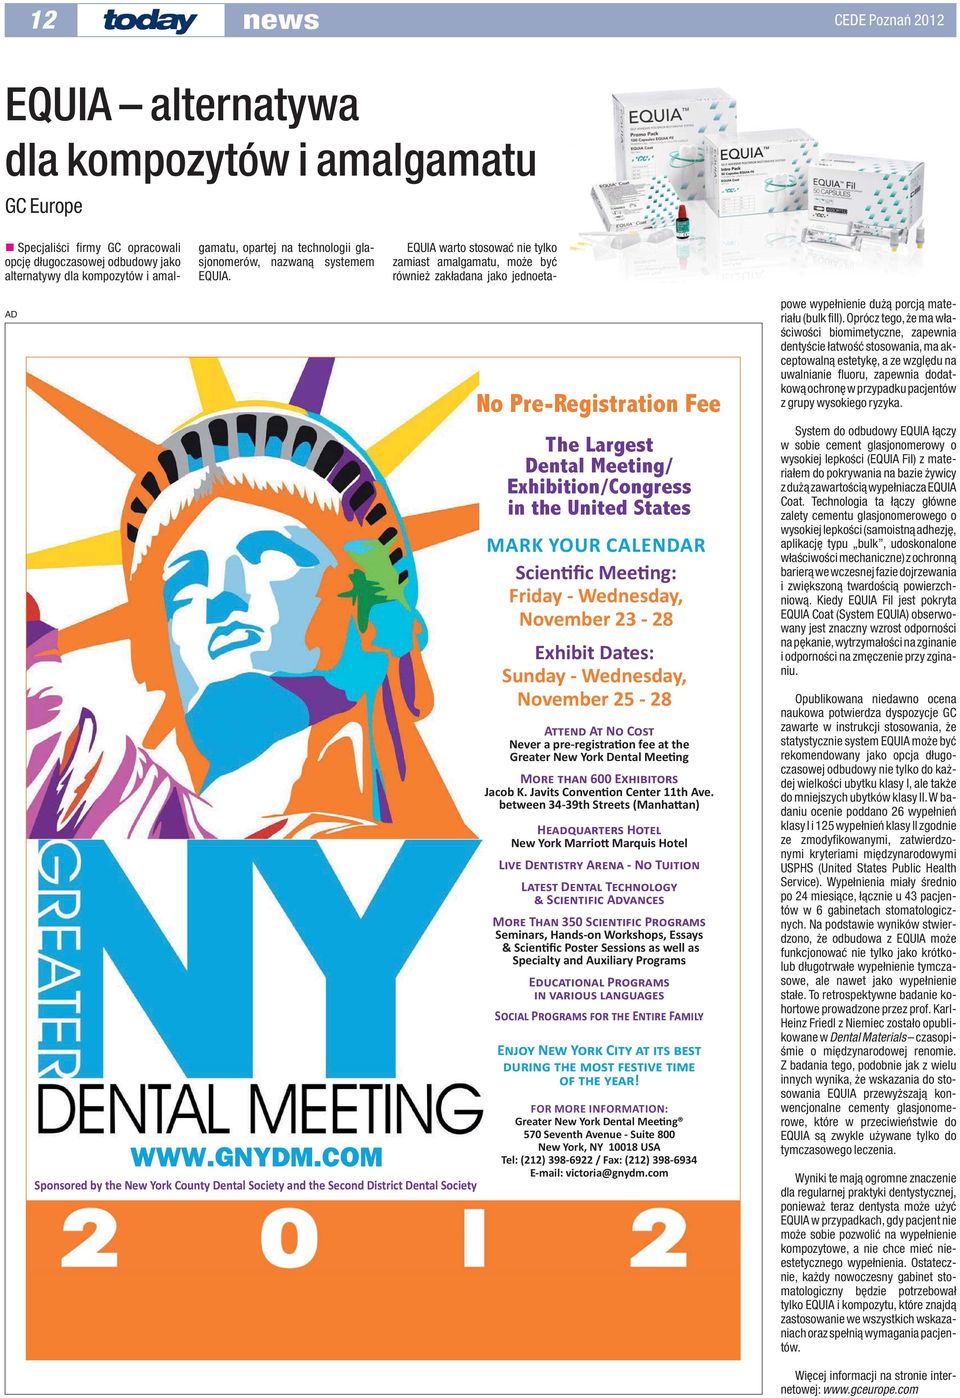 Sponsored by the New York County Dental Society and the Second District Dental Society MARK YOUR CALENDAR Scien c Mee ng: Friday - Wednesday, November 23-28 Exhibit Dates: Sunday - Wednesday,